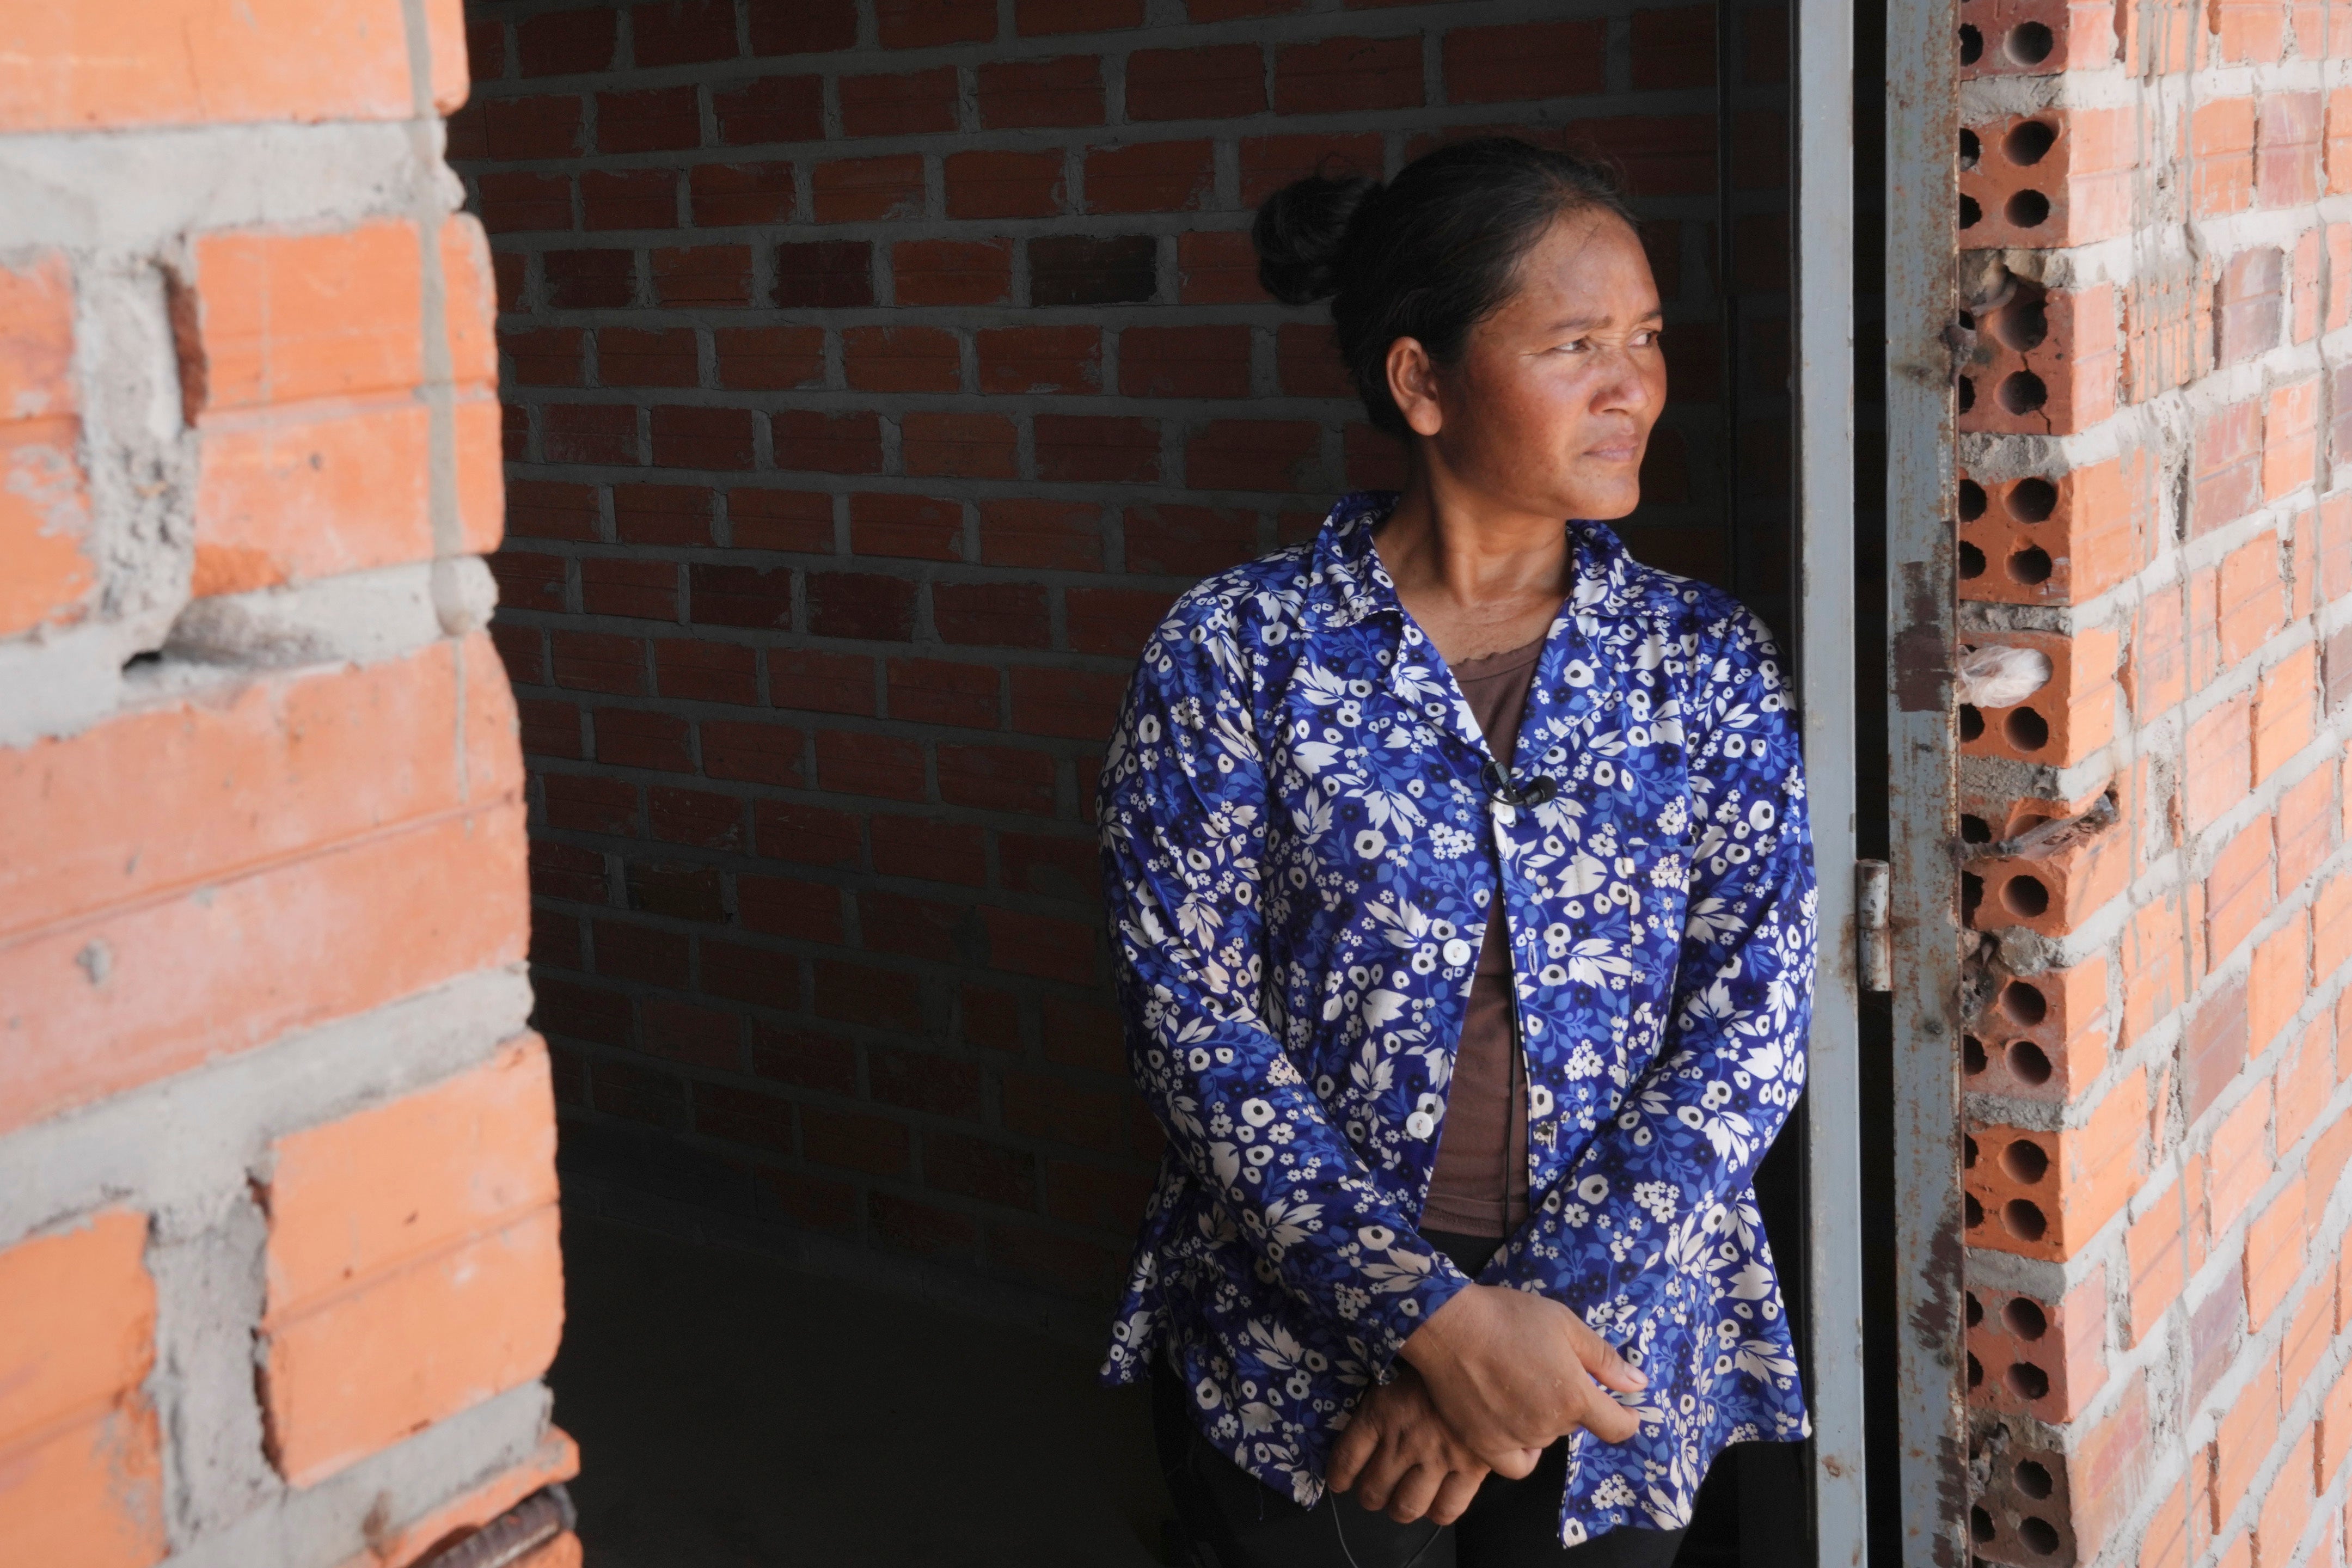 Chhem Hay, 37, stands at a main door of her house under construction at Run Ta Ek village in Siem Reap province